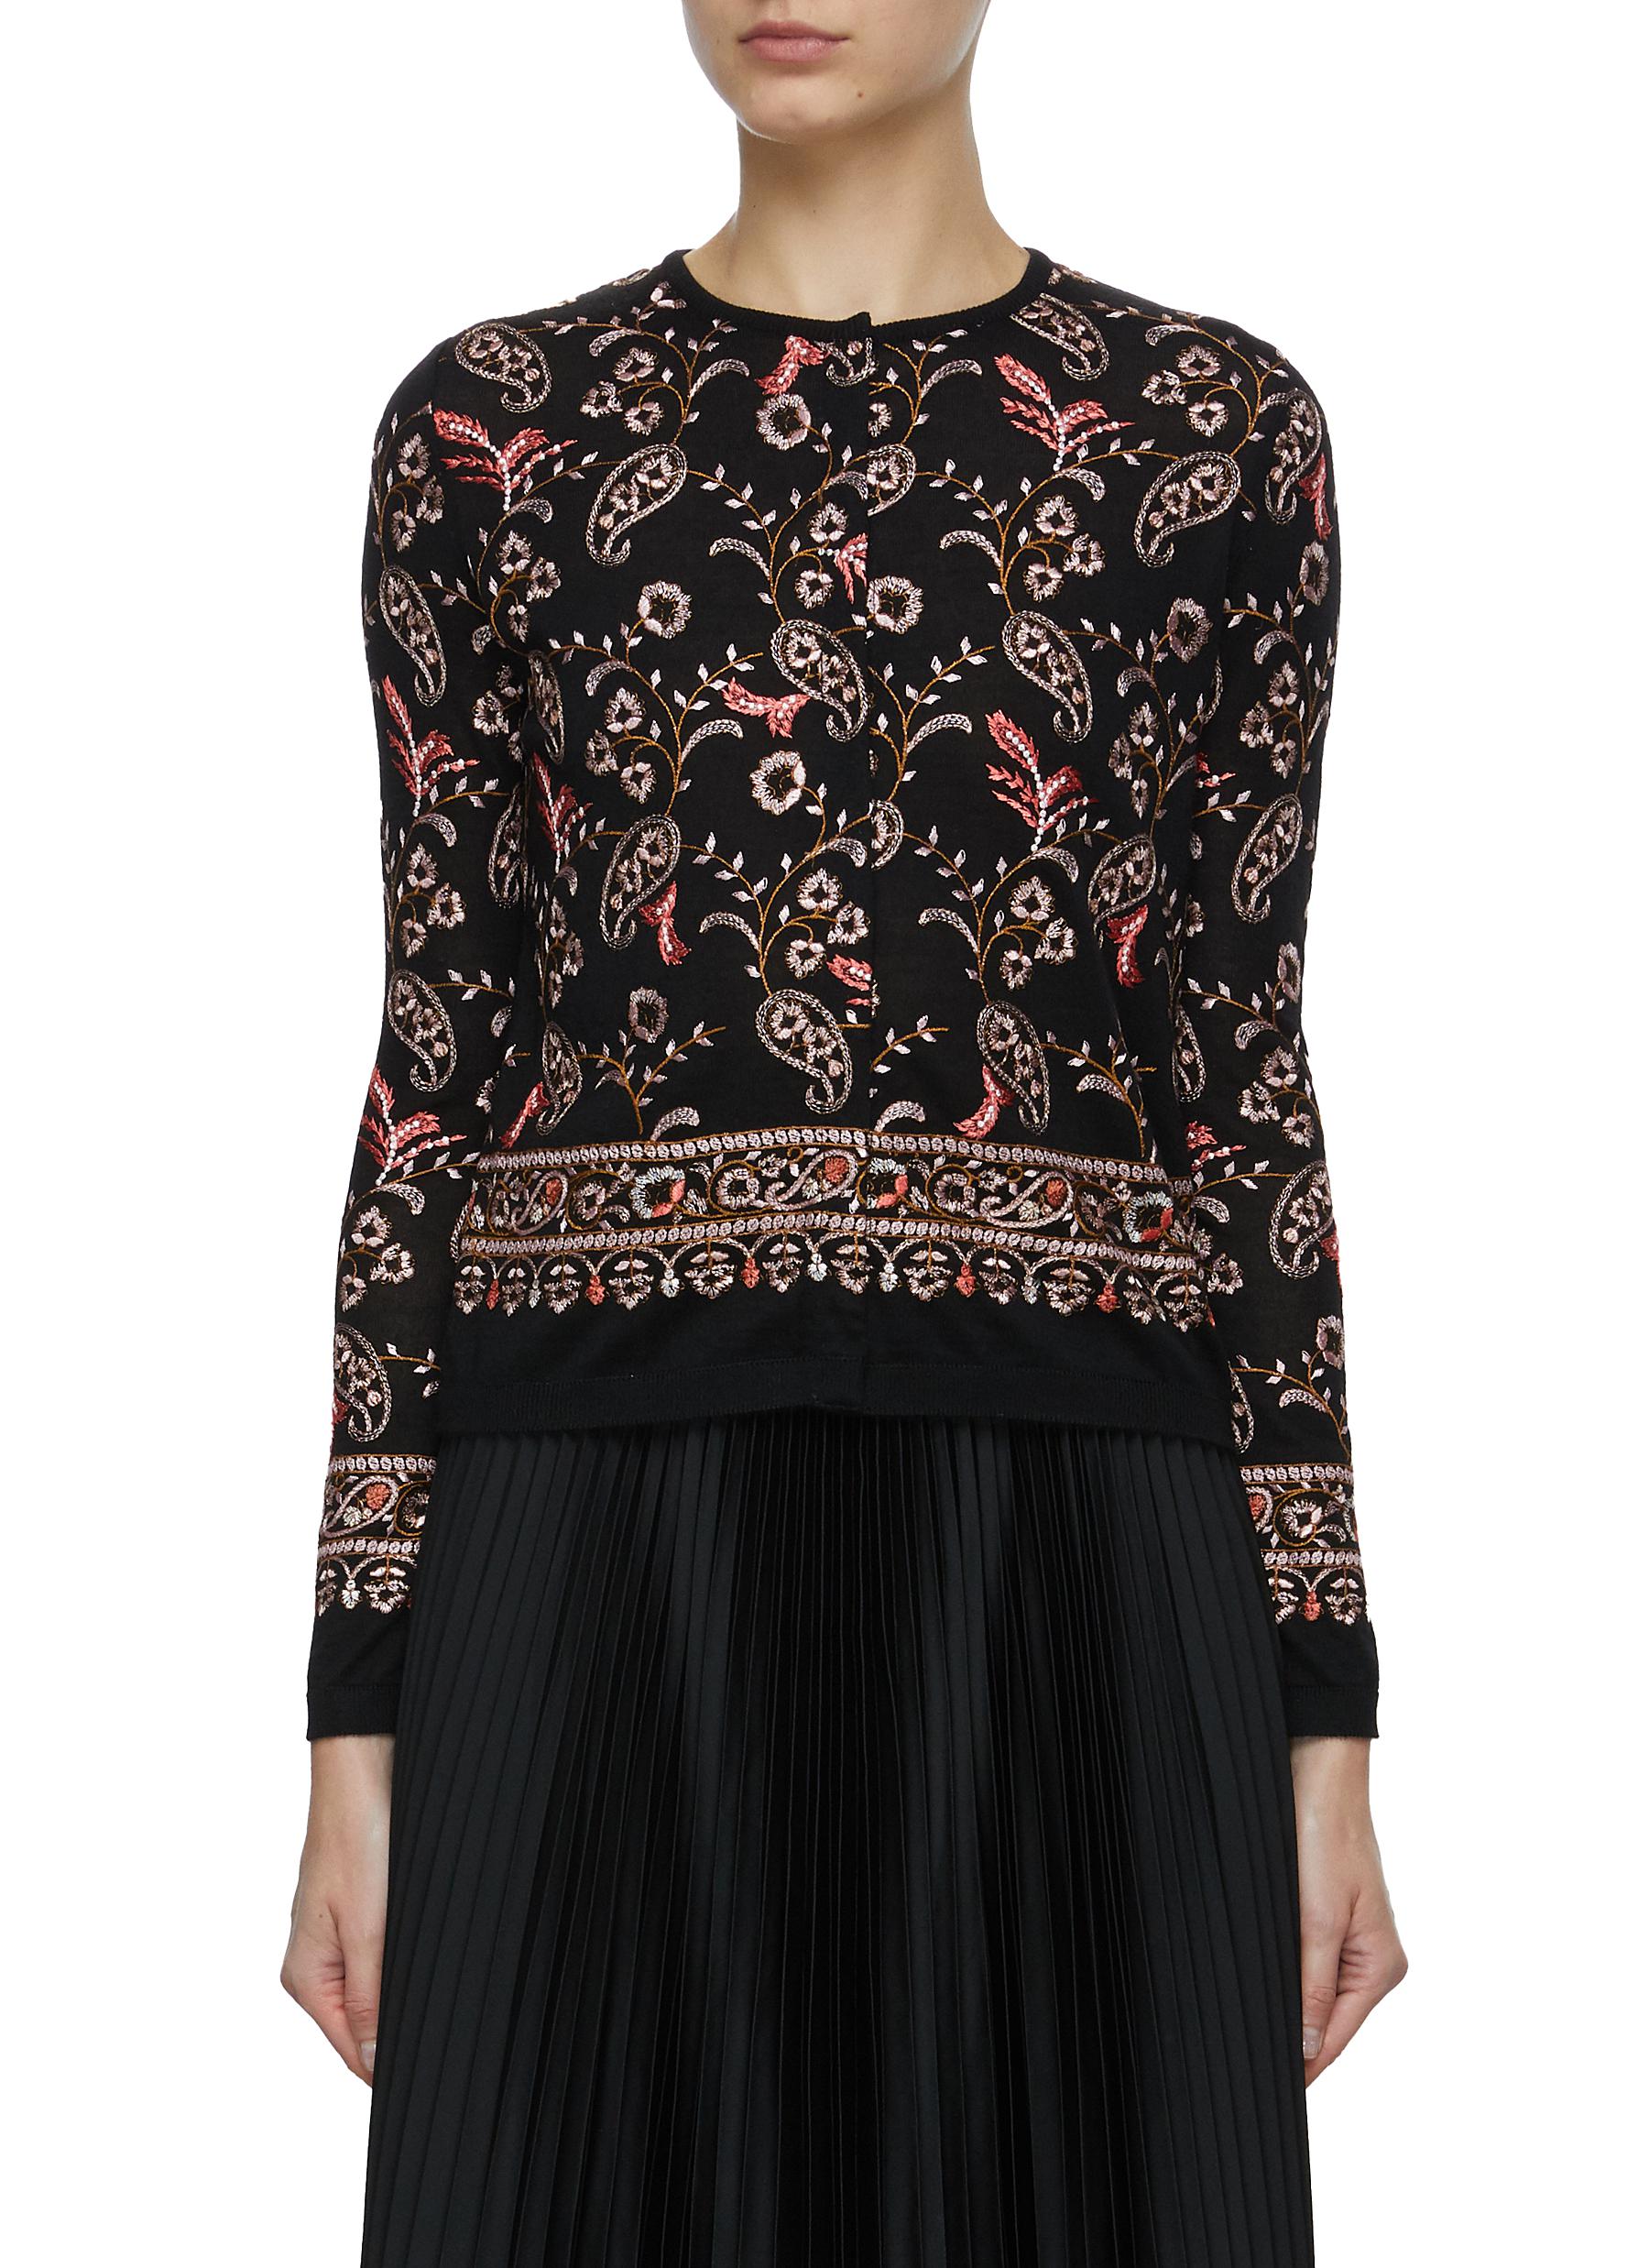 Floral Embroidered Knit Cardigan